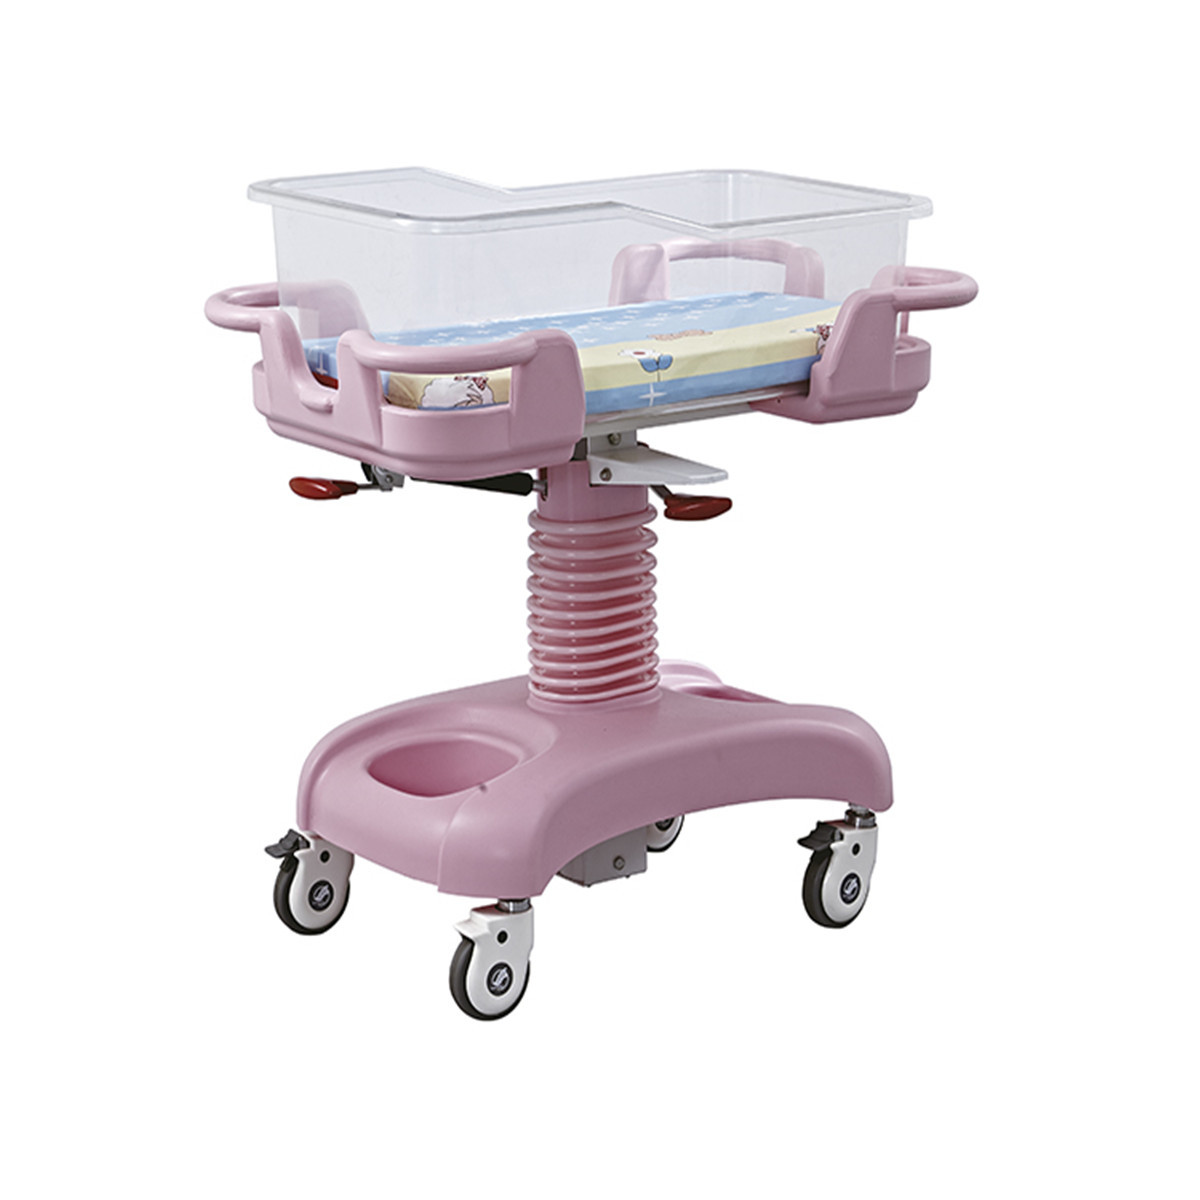  Medical Deluxe Adjustable Baby Child Bed Crib Driver With Wheel In Pink Manufactures